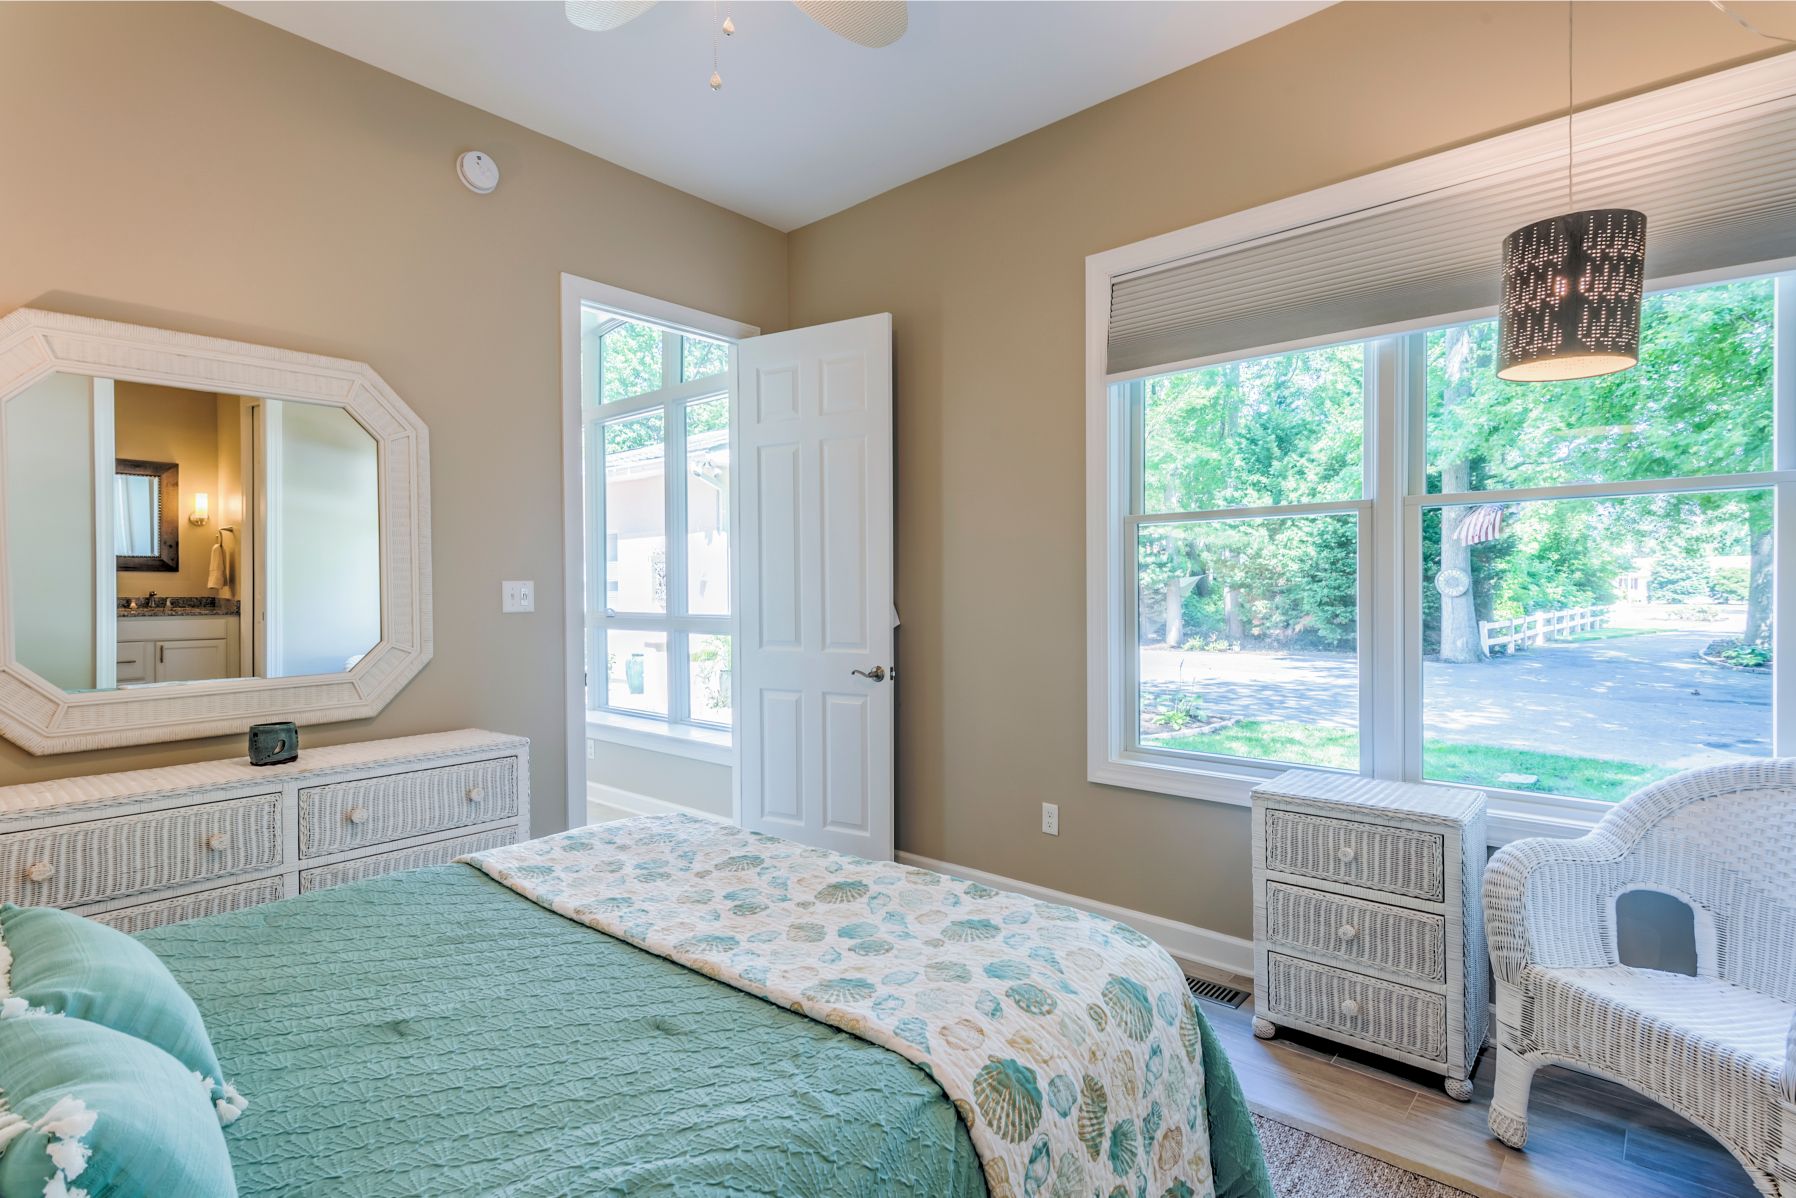 Addition in Juniper Court, Ocean Pines MD - Bedroom with Large Windows and Octagon Mirror